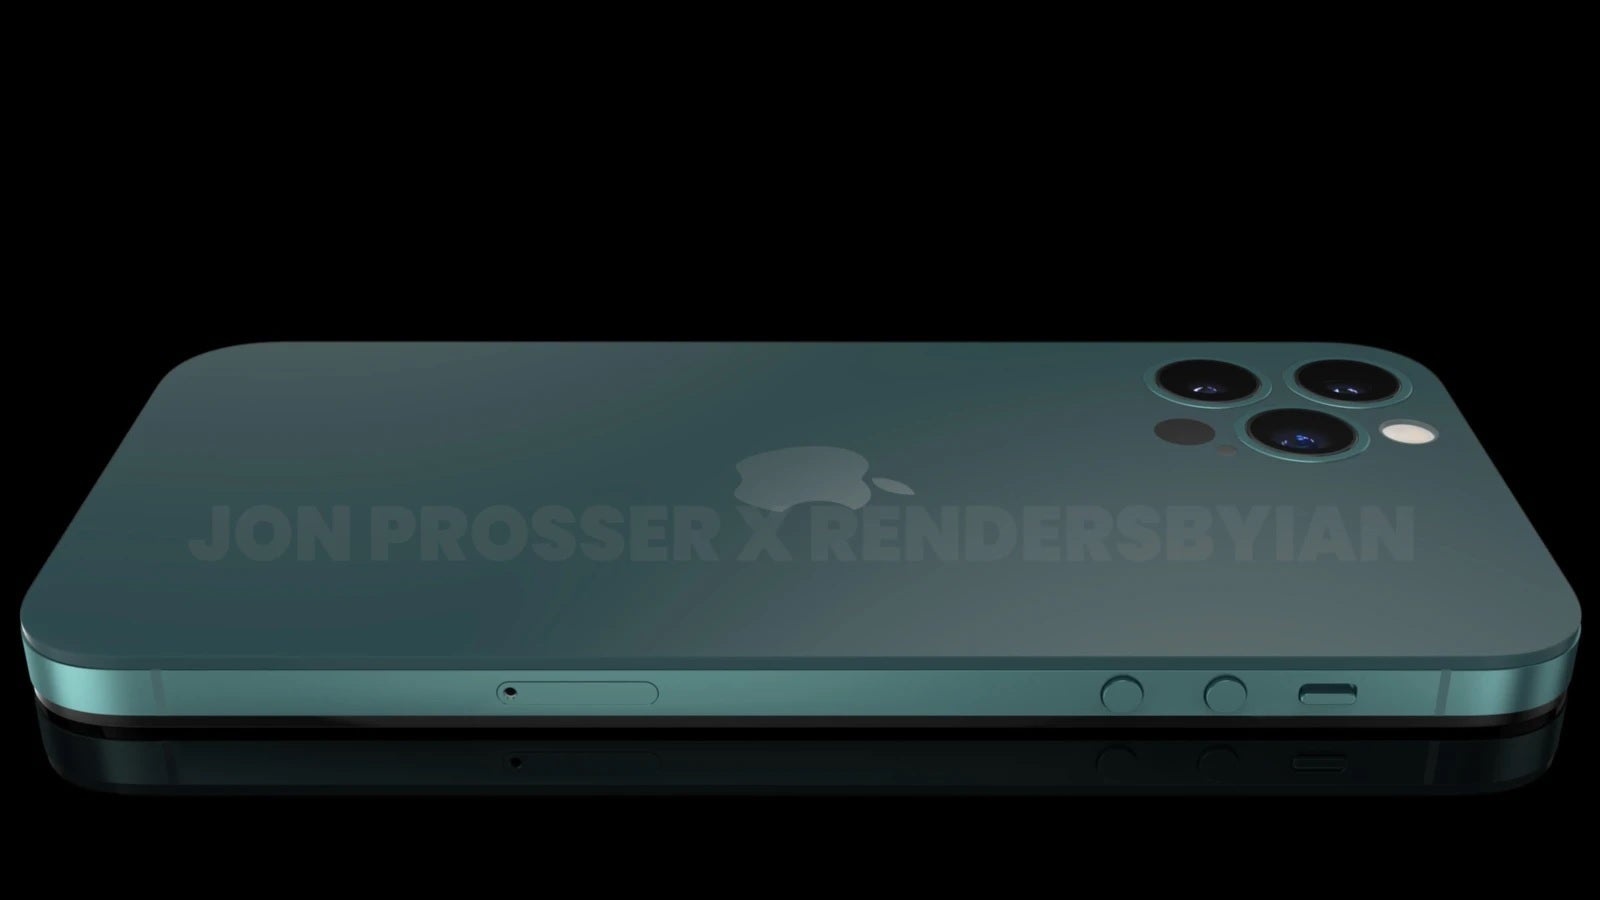 Render of the iPhone 15 Ultra - Apple suppliers may have leaked big news about the design of the iPhone 15 Pro and Ultra